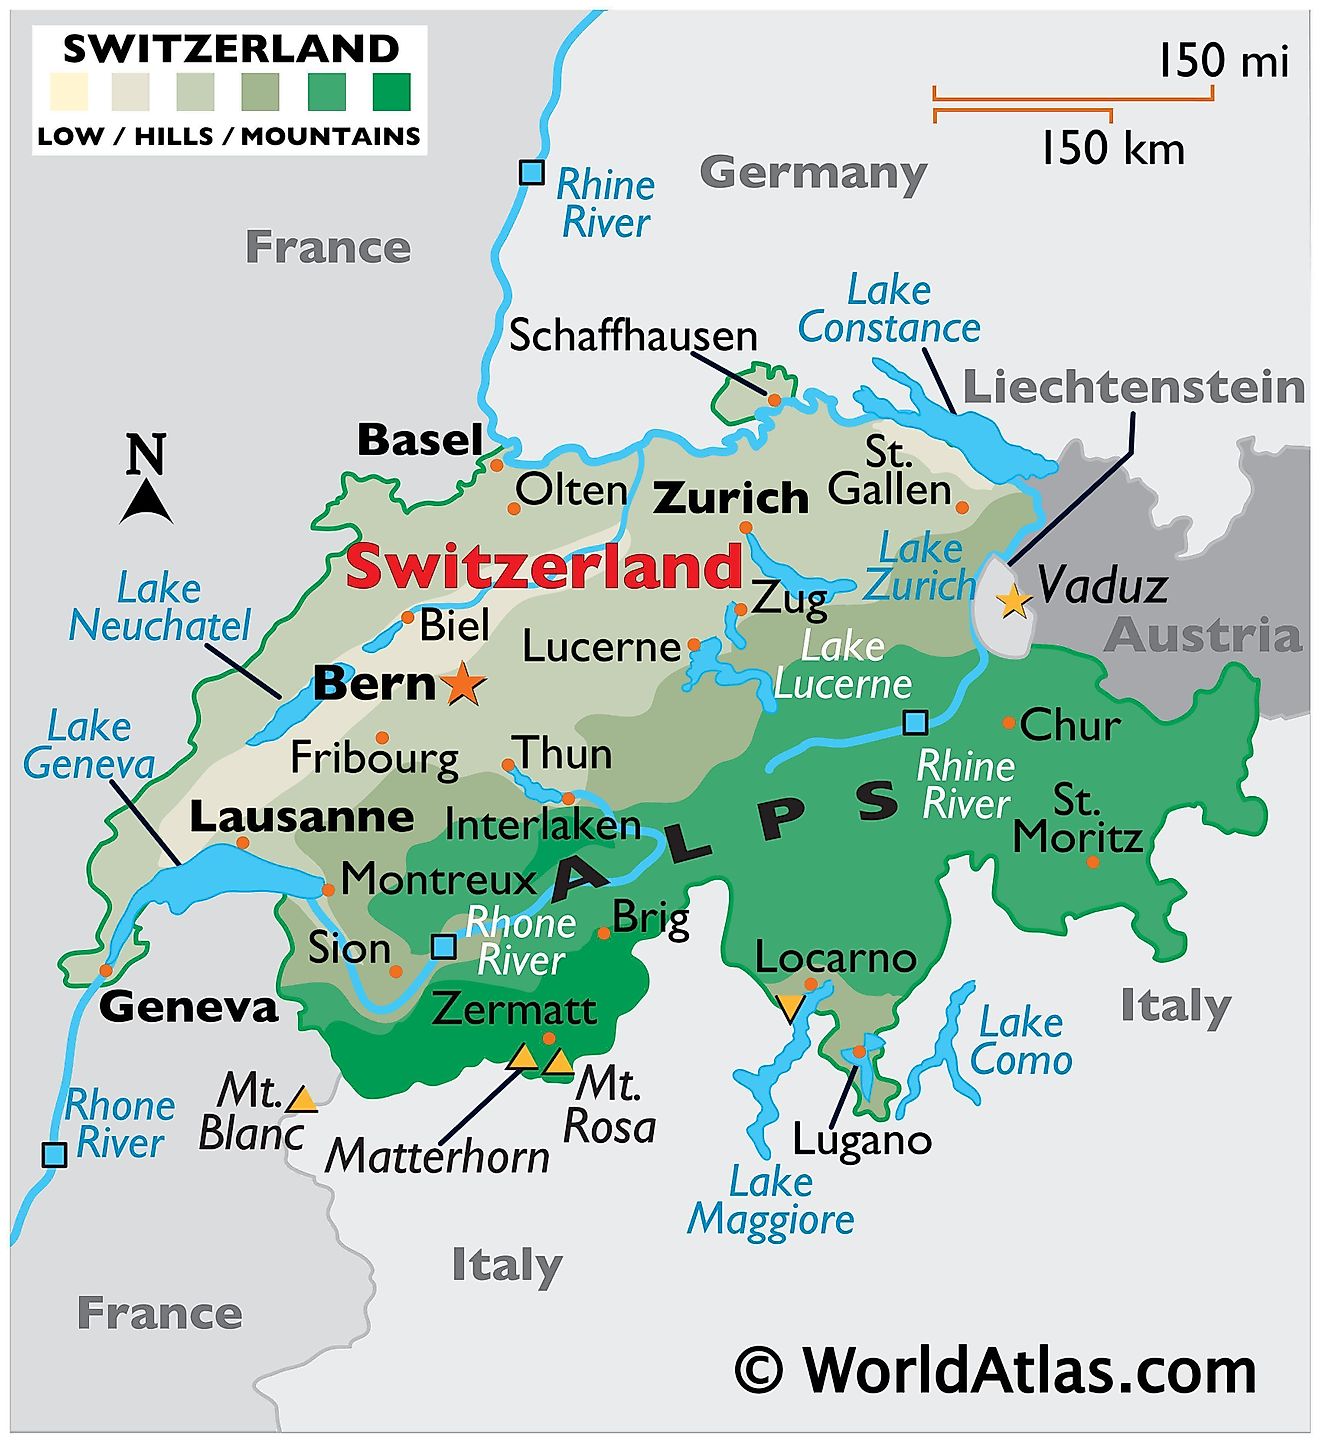 The Physical Map of Switzerland displaying state boundaries, relief, mountains, Monte Rosa, Mount Matterhorn, major lakes, important cities, etc.